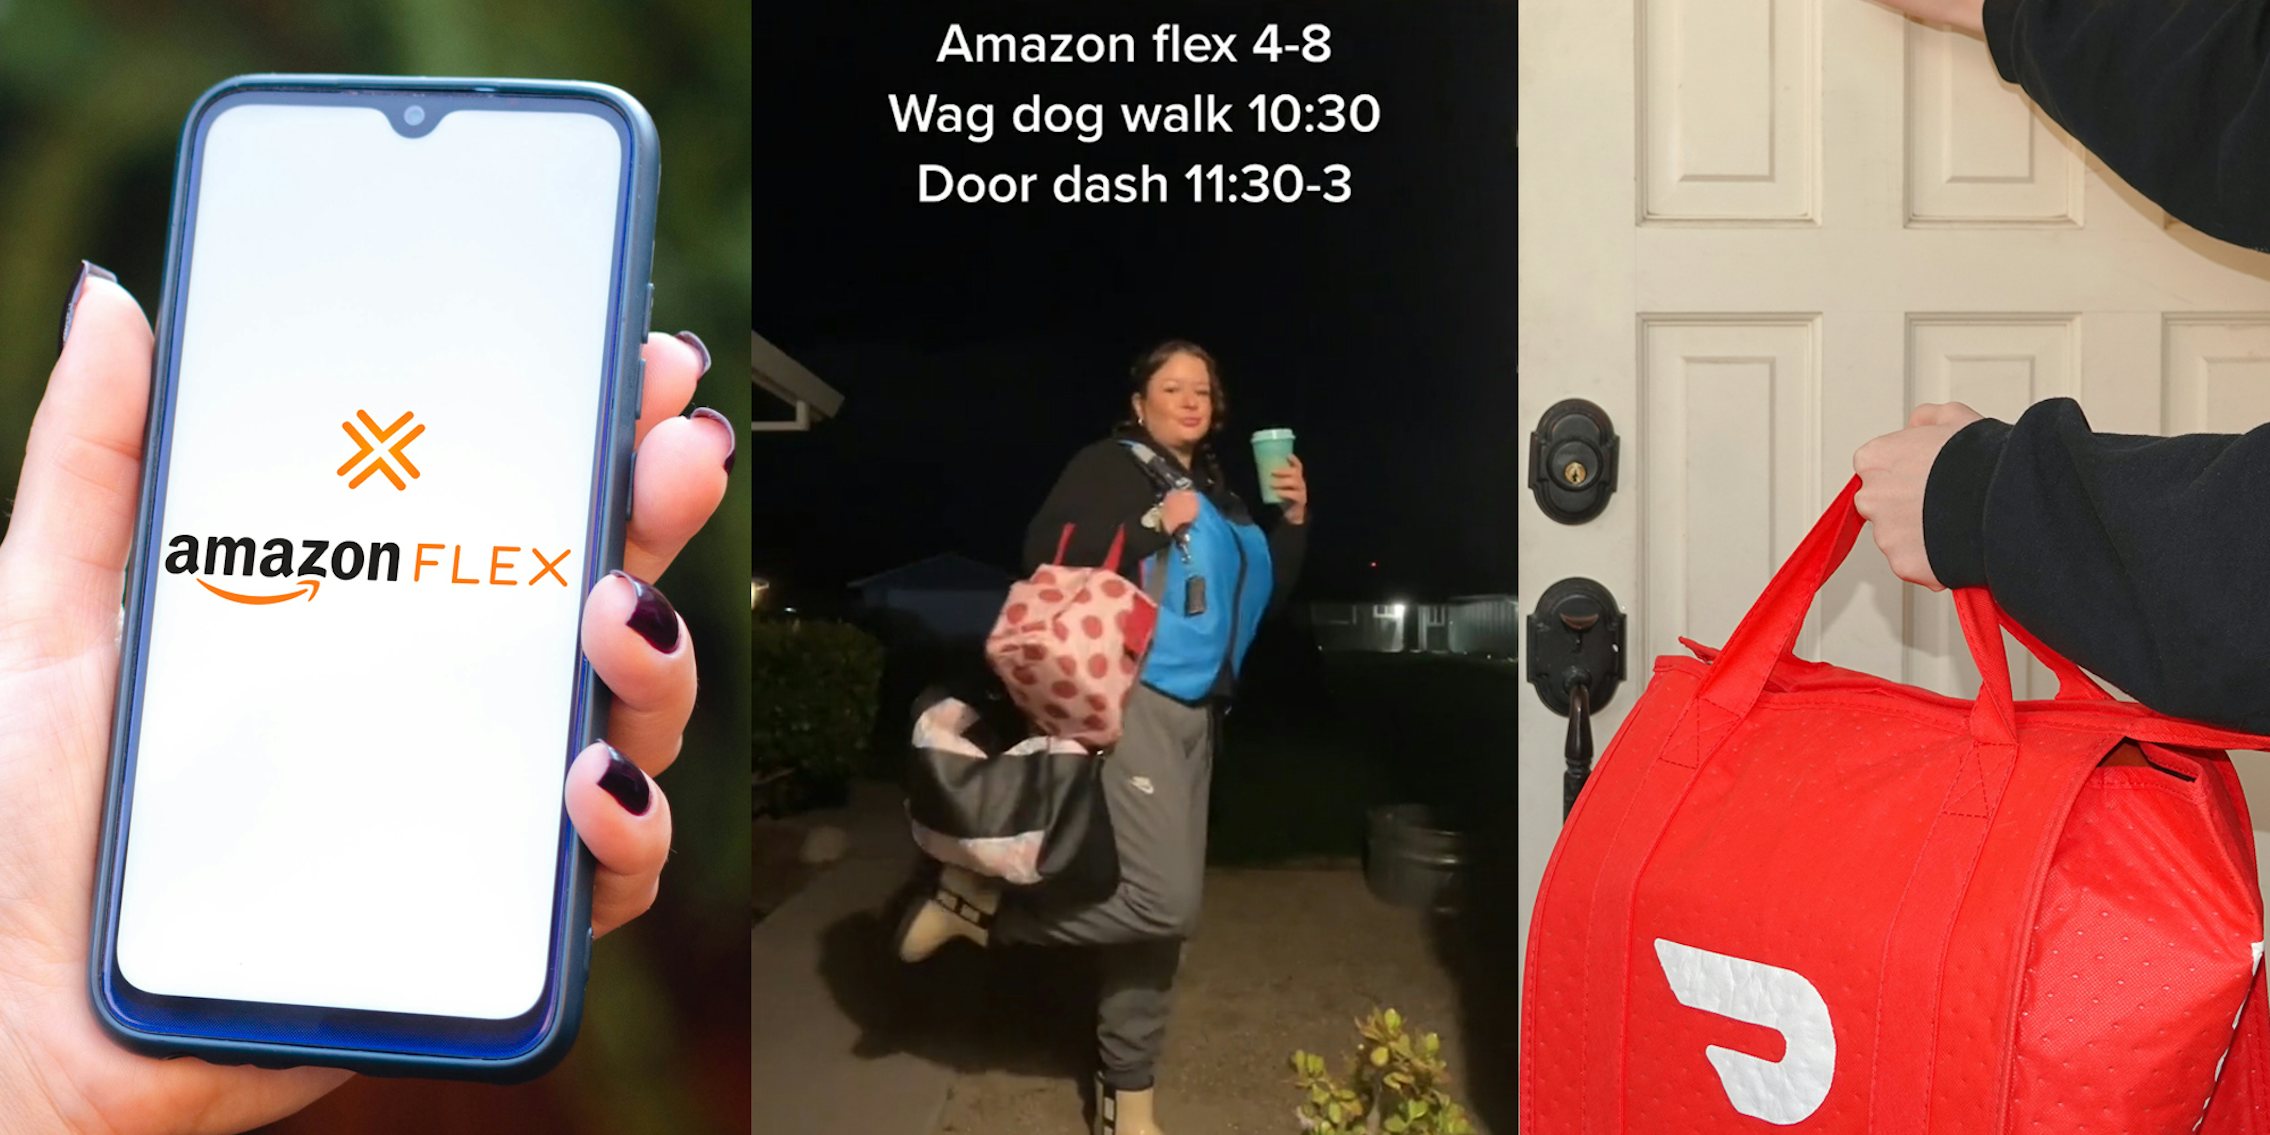 hand holding phone with Amazon Flex on screen outside (l) independent contractor outside with caption 'Amazon flex 4-8 Wag dog walk 10:30 Door dash 11:30-3' (c) DoorDash driver knocking on door holding branded bag (r)